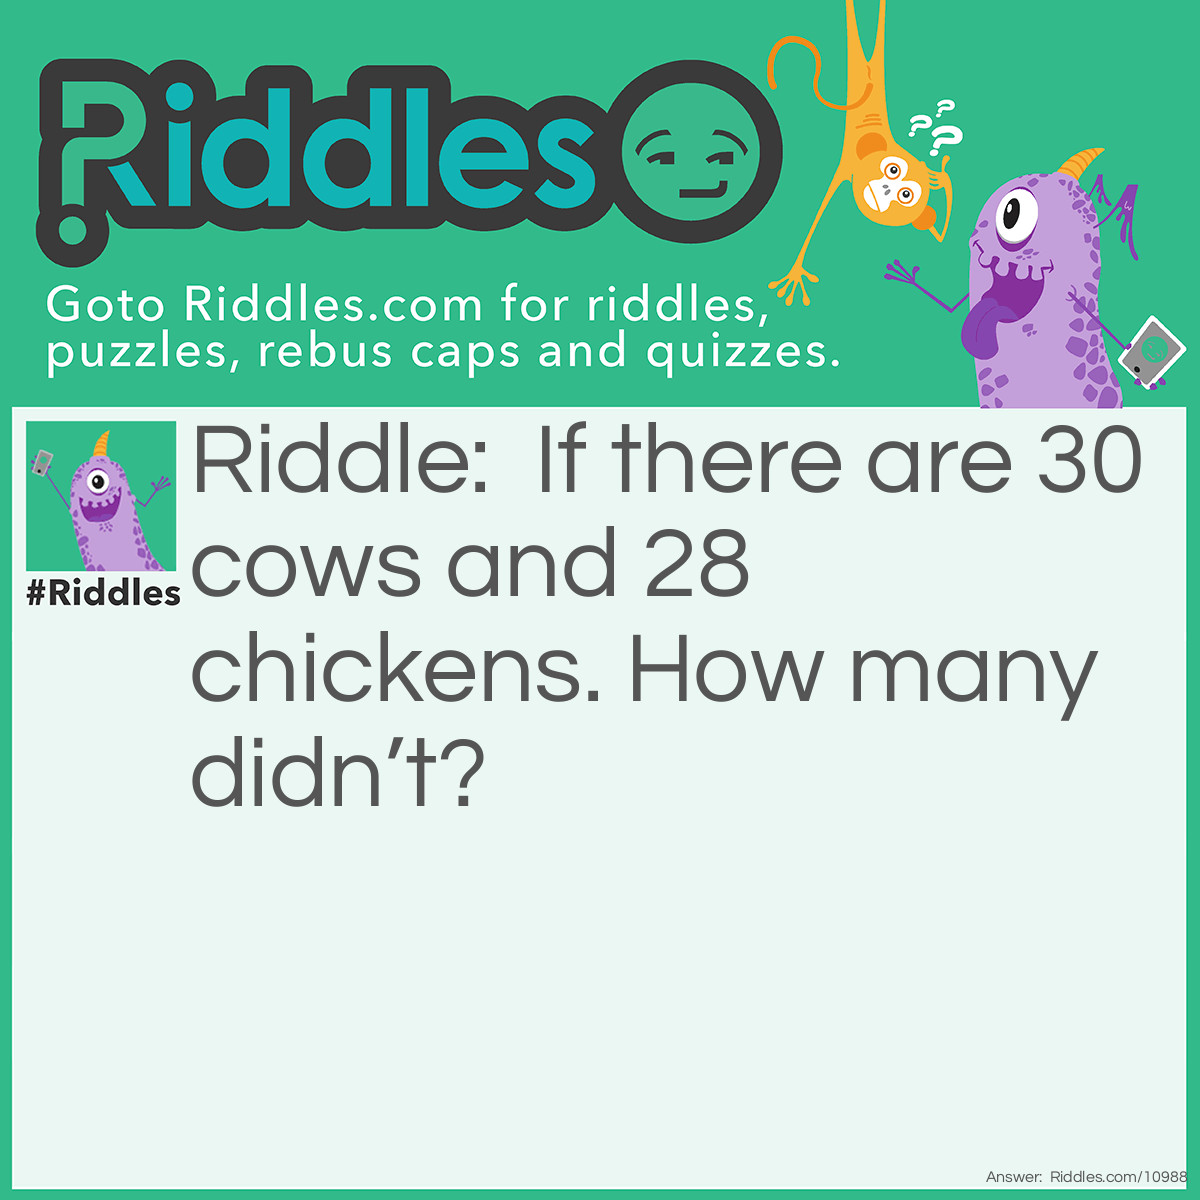 Riddle: If there are 30 cows and 28 chickens. How many didn’t? Answer: 10 (twenty ate chickens).